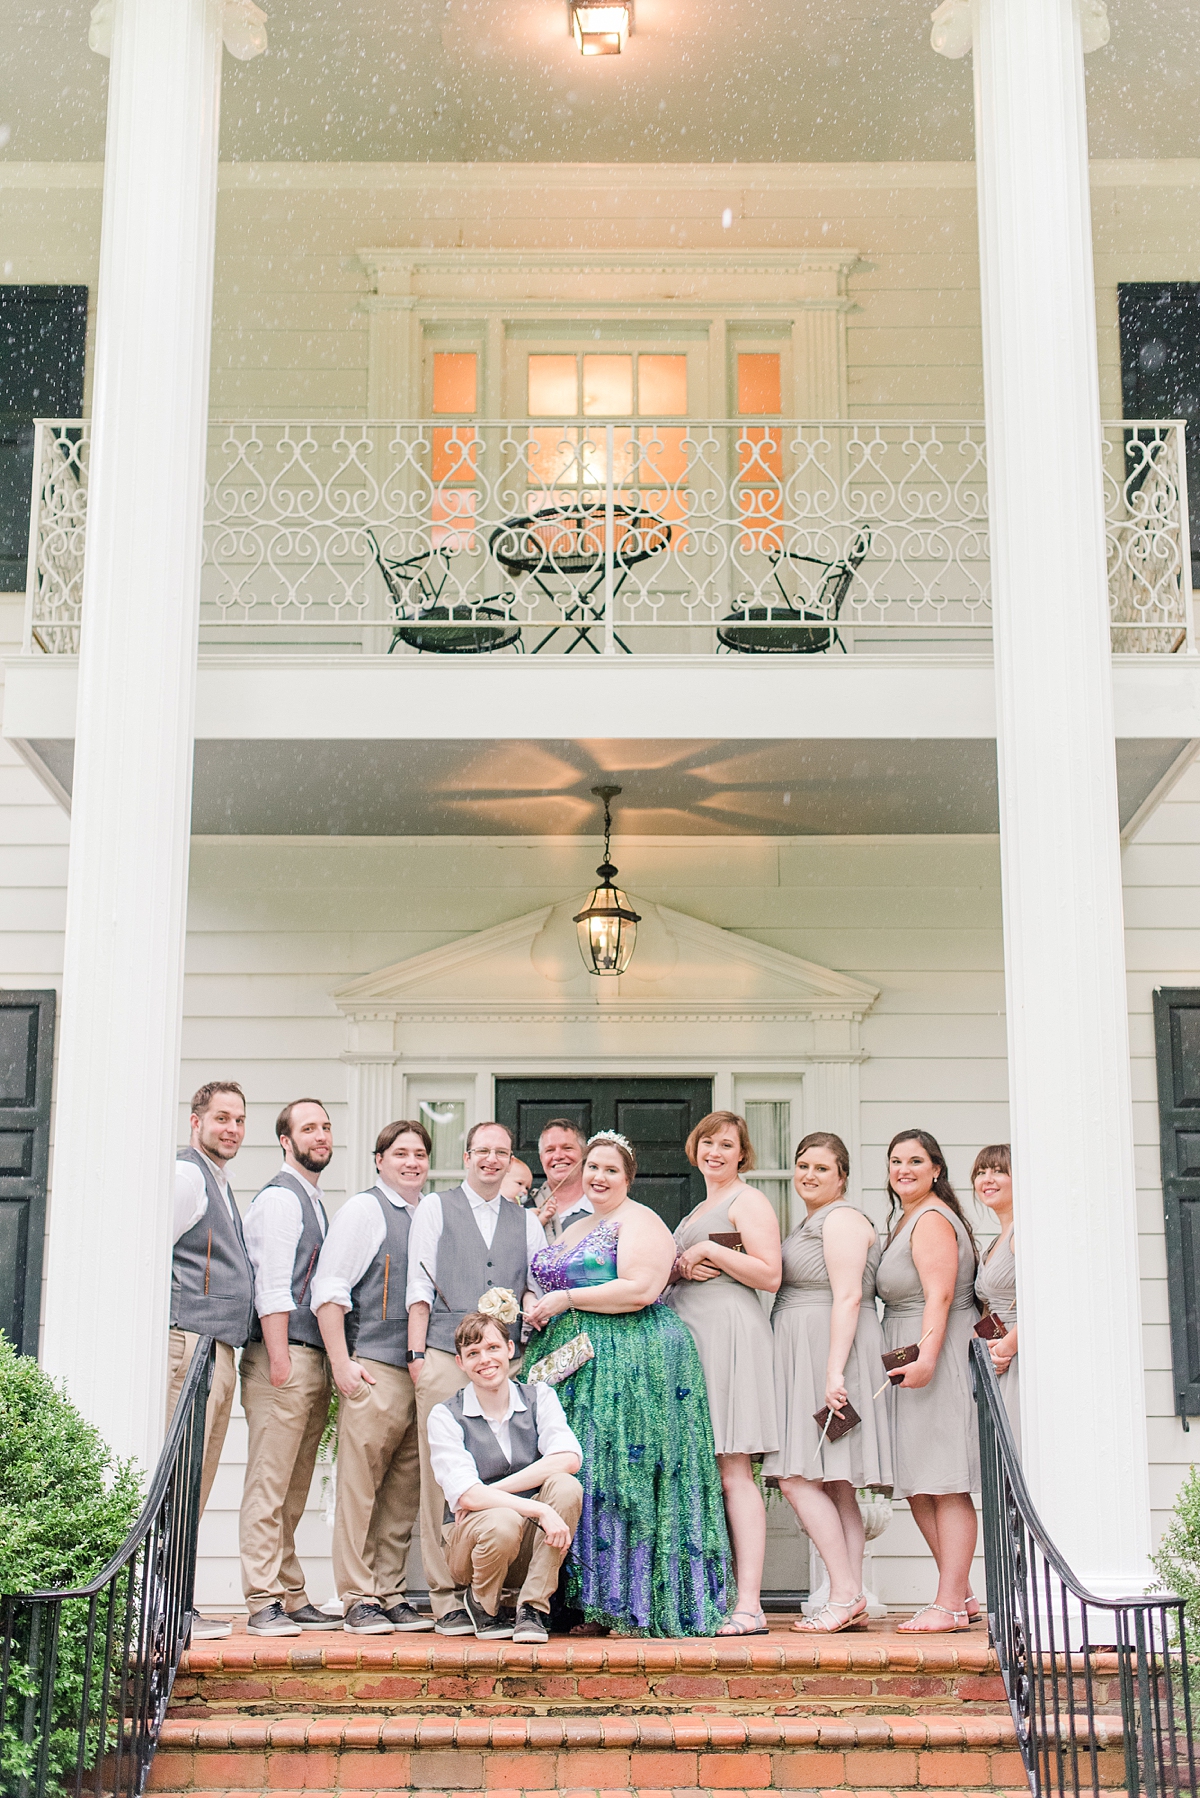 Harry Potter Themed Bridal Party Portraits at Virginia Cliffe Inn Wedding. Wedding Photography by Virginia Wedding Photographer Kailey Brianne Photography. 